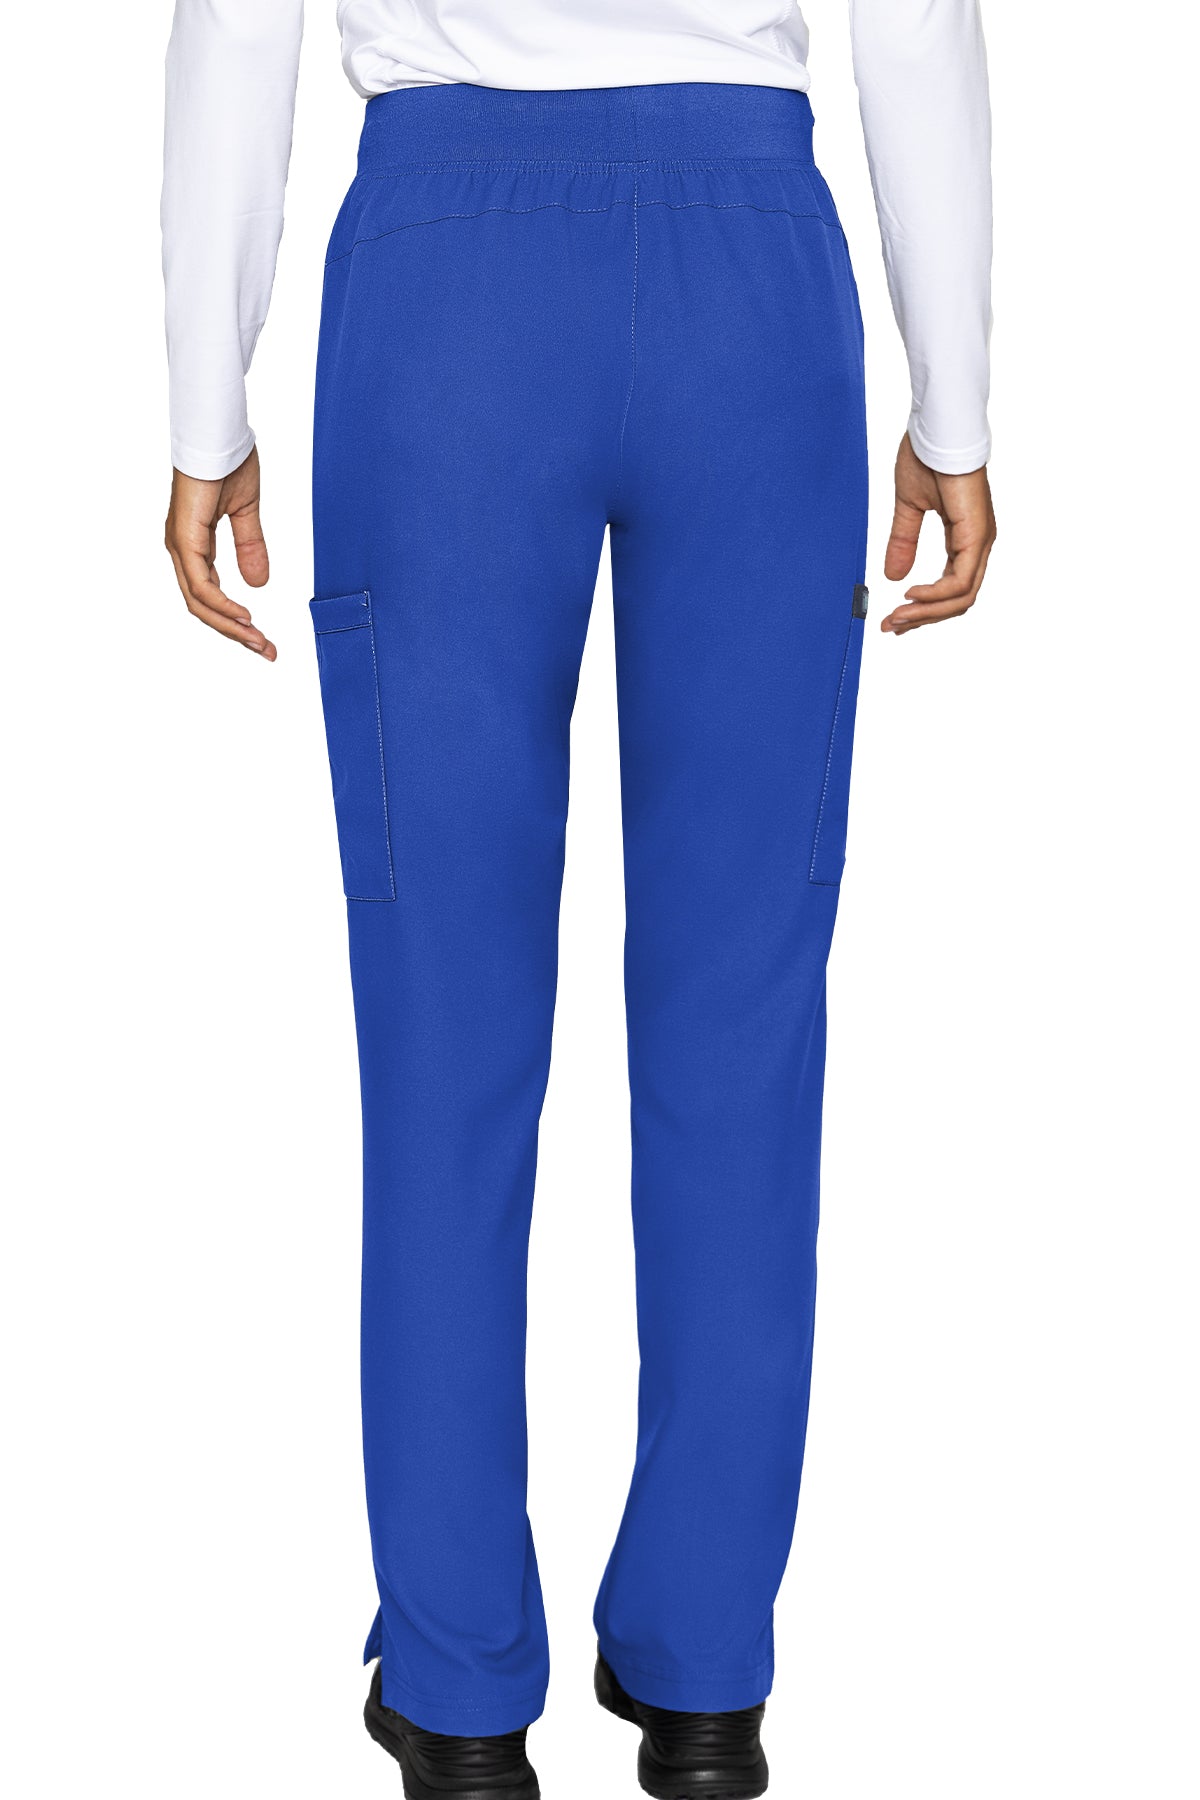 Med Couture 2702 Insight Women's Zipper Pocket Pant - TALL royal back